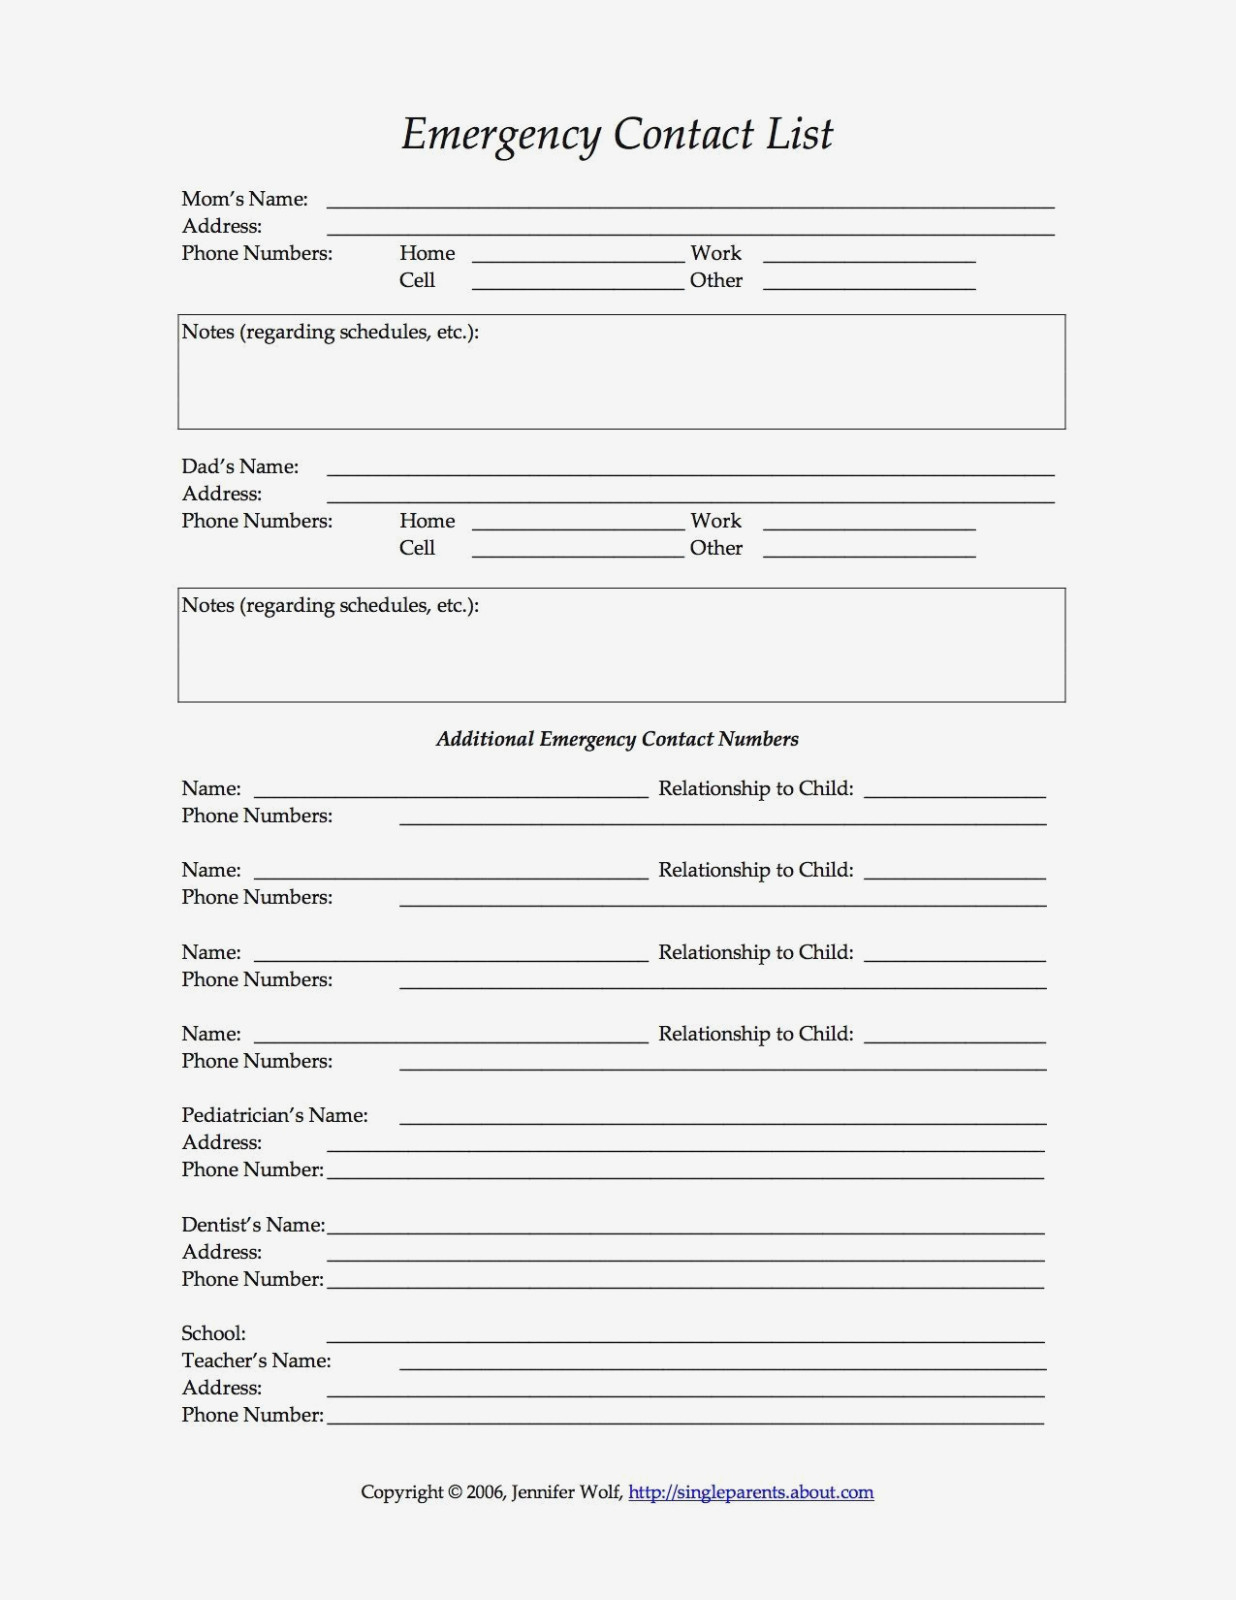 13 Free Printable Forms For Single Parents | Daycare: Recipes, Forms - Free Printable Daycare Forms